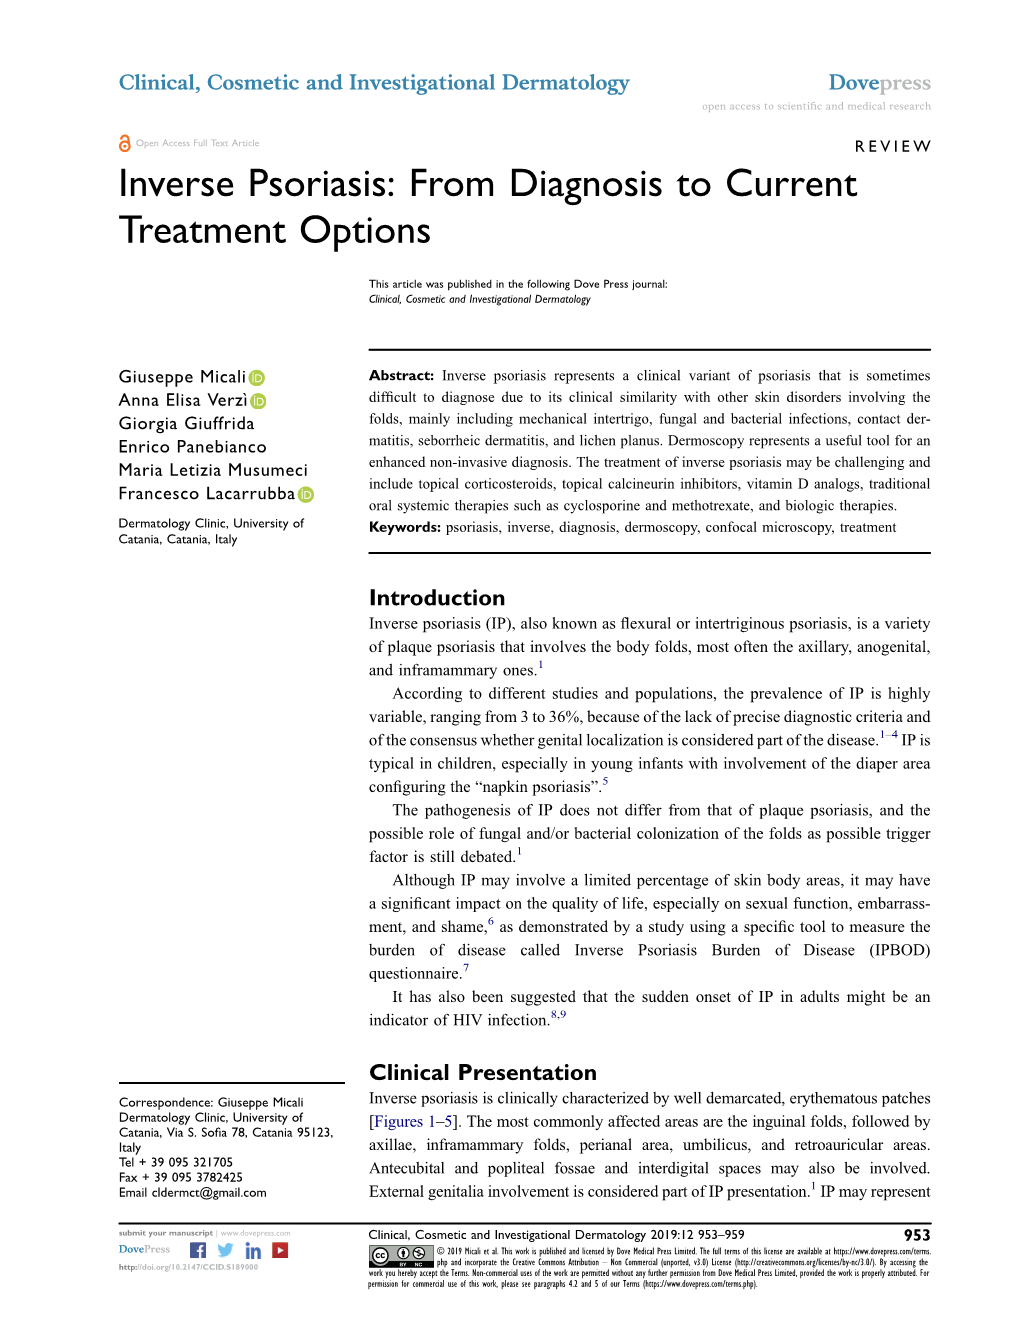 Inverse Psoriasis: from Diagnosis to Current Treatment Options